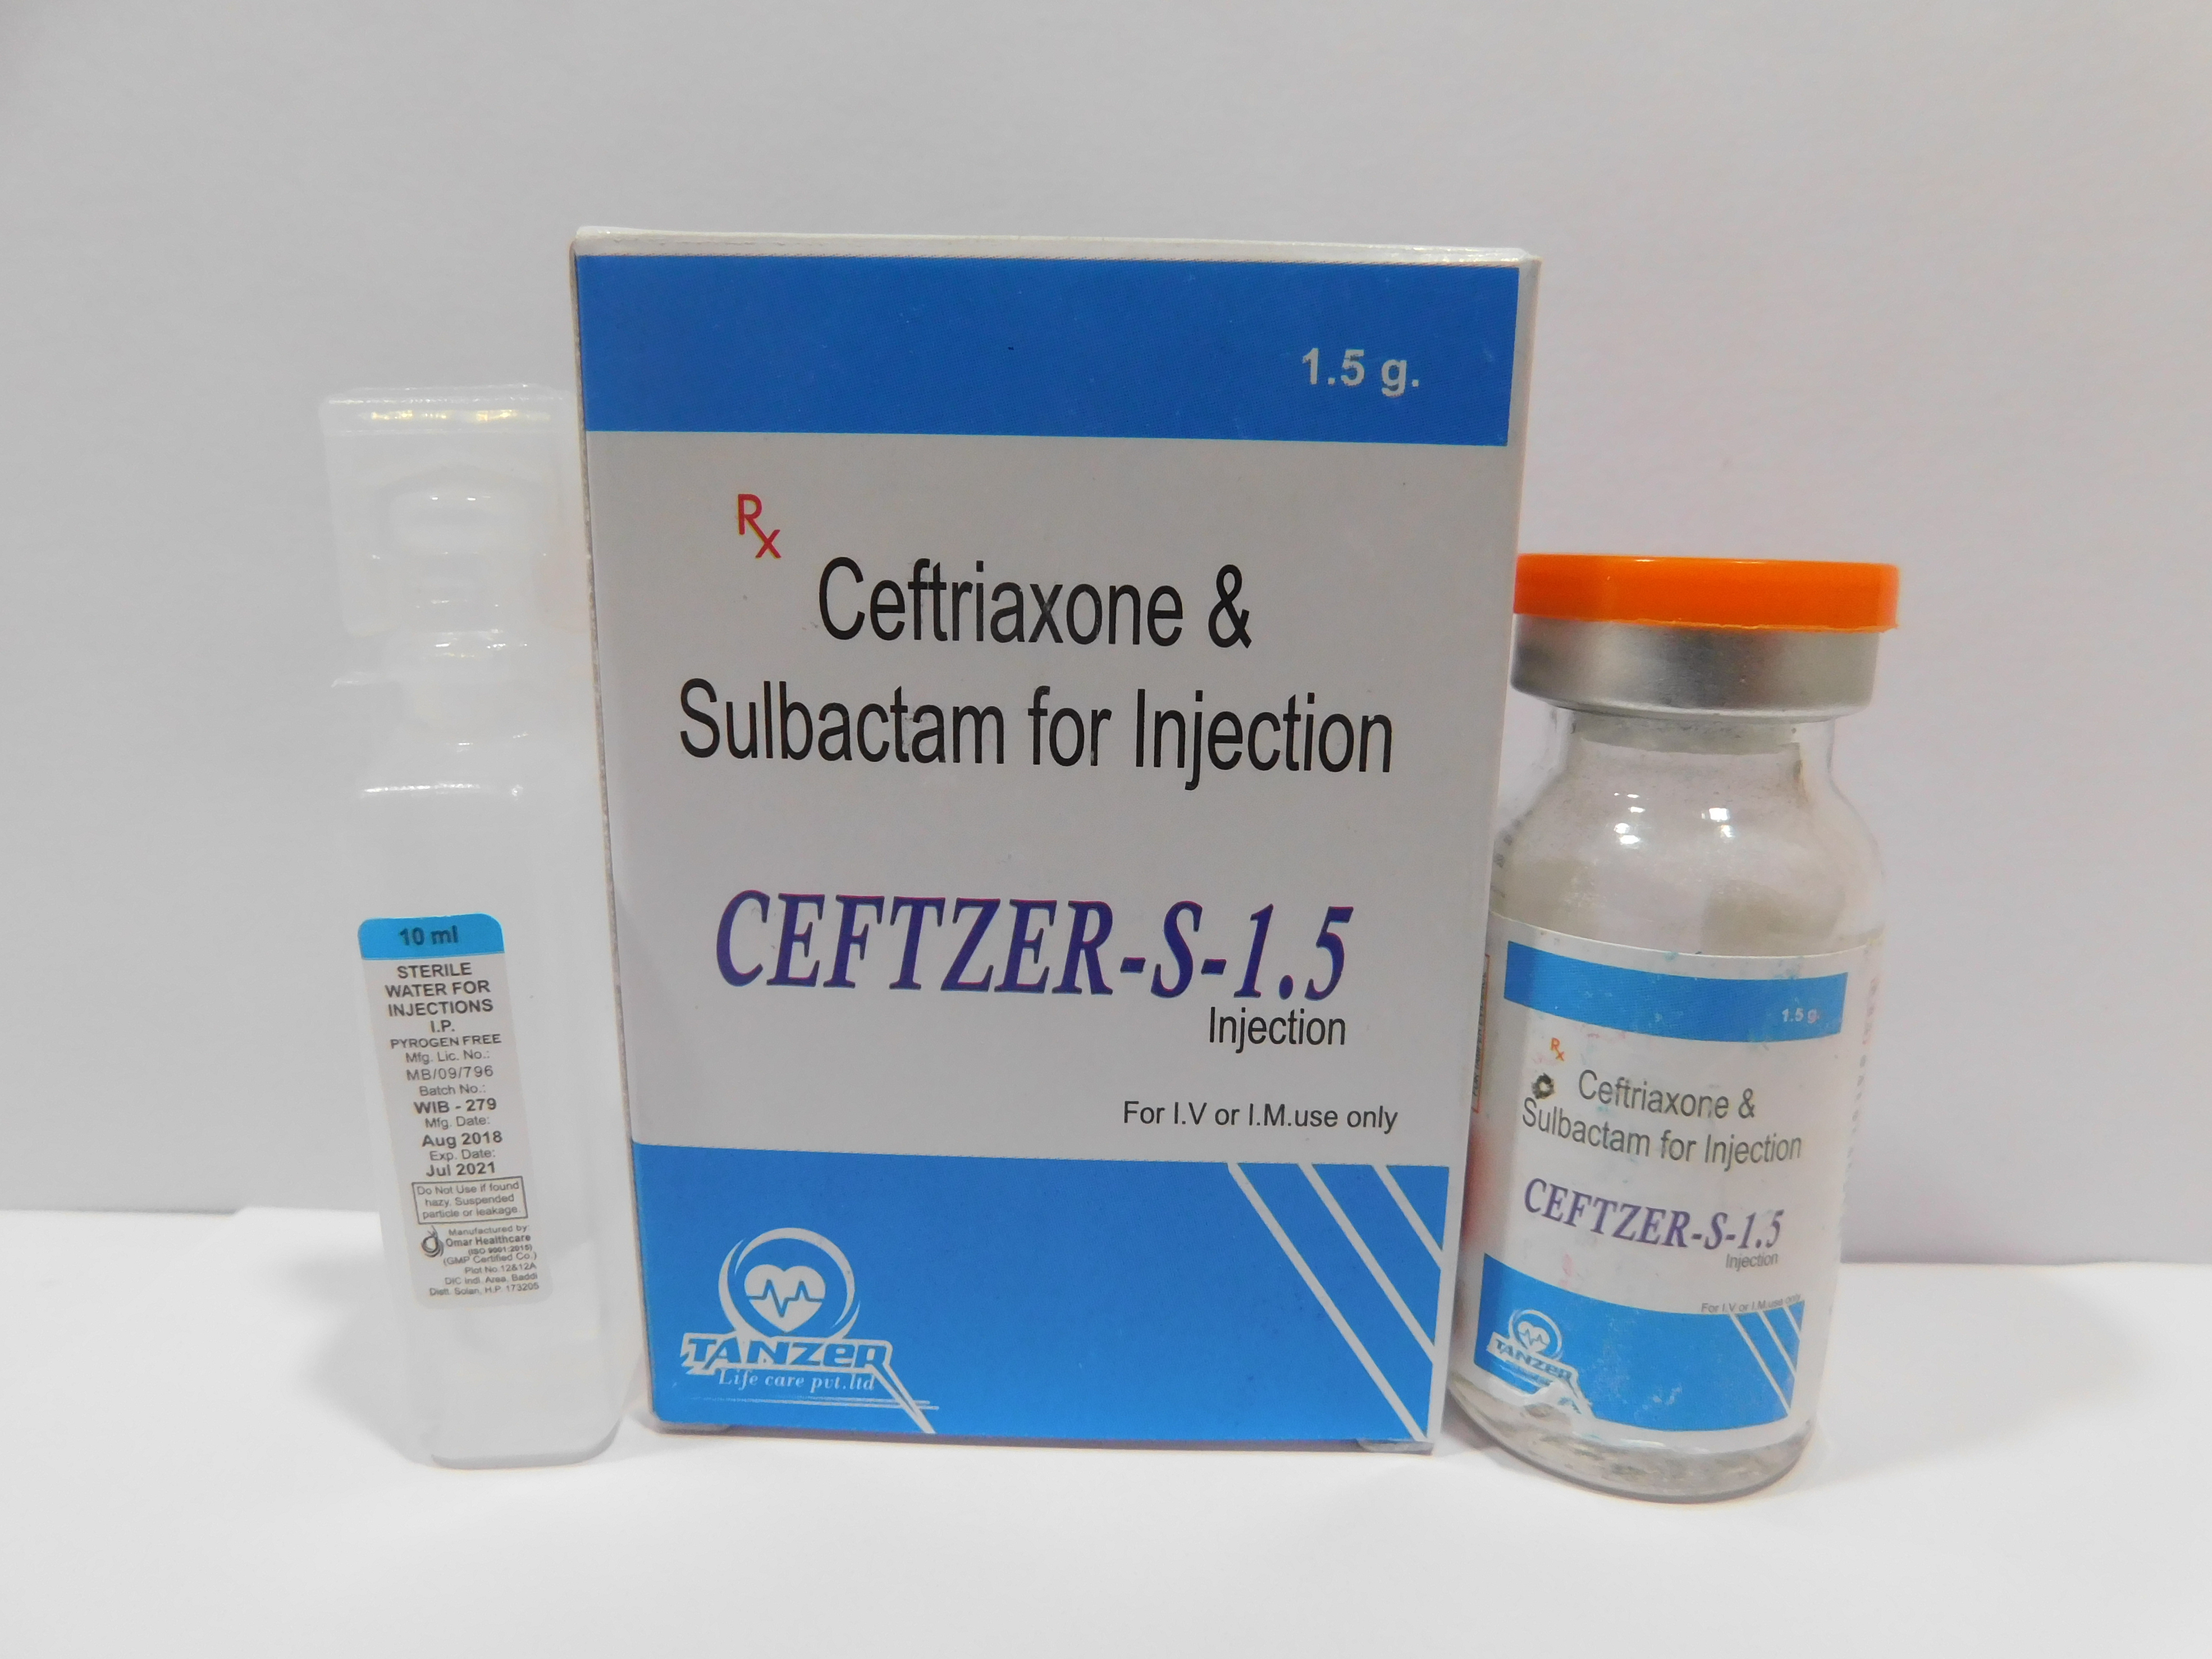 Product Name: CEFTZER S 1.5, Compositions of CEFTZER S 1.5 are ceftriaxone &Sulbactam for injection - Tanzer Lifecare Private Limited